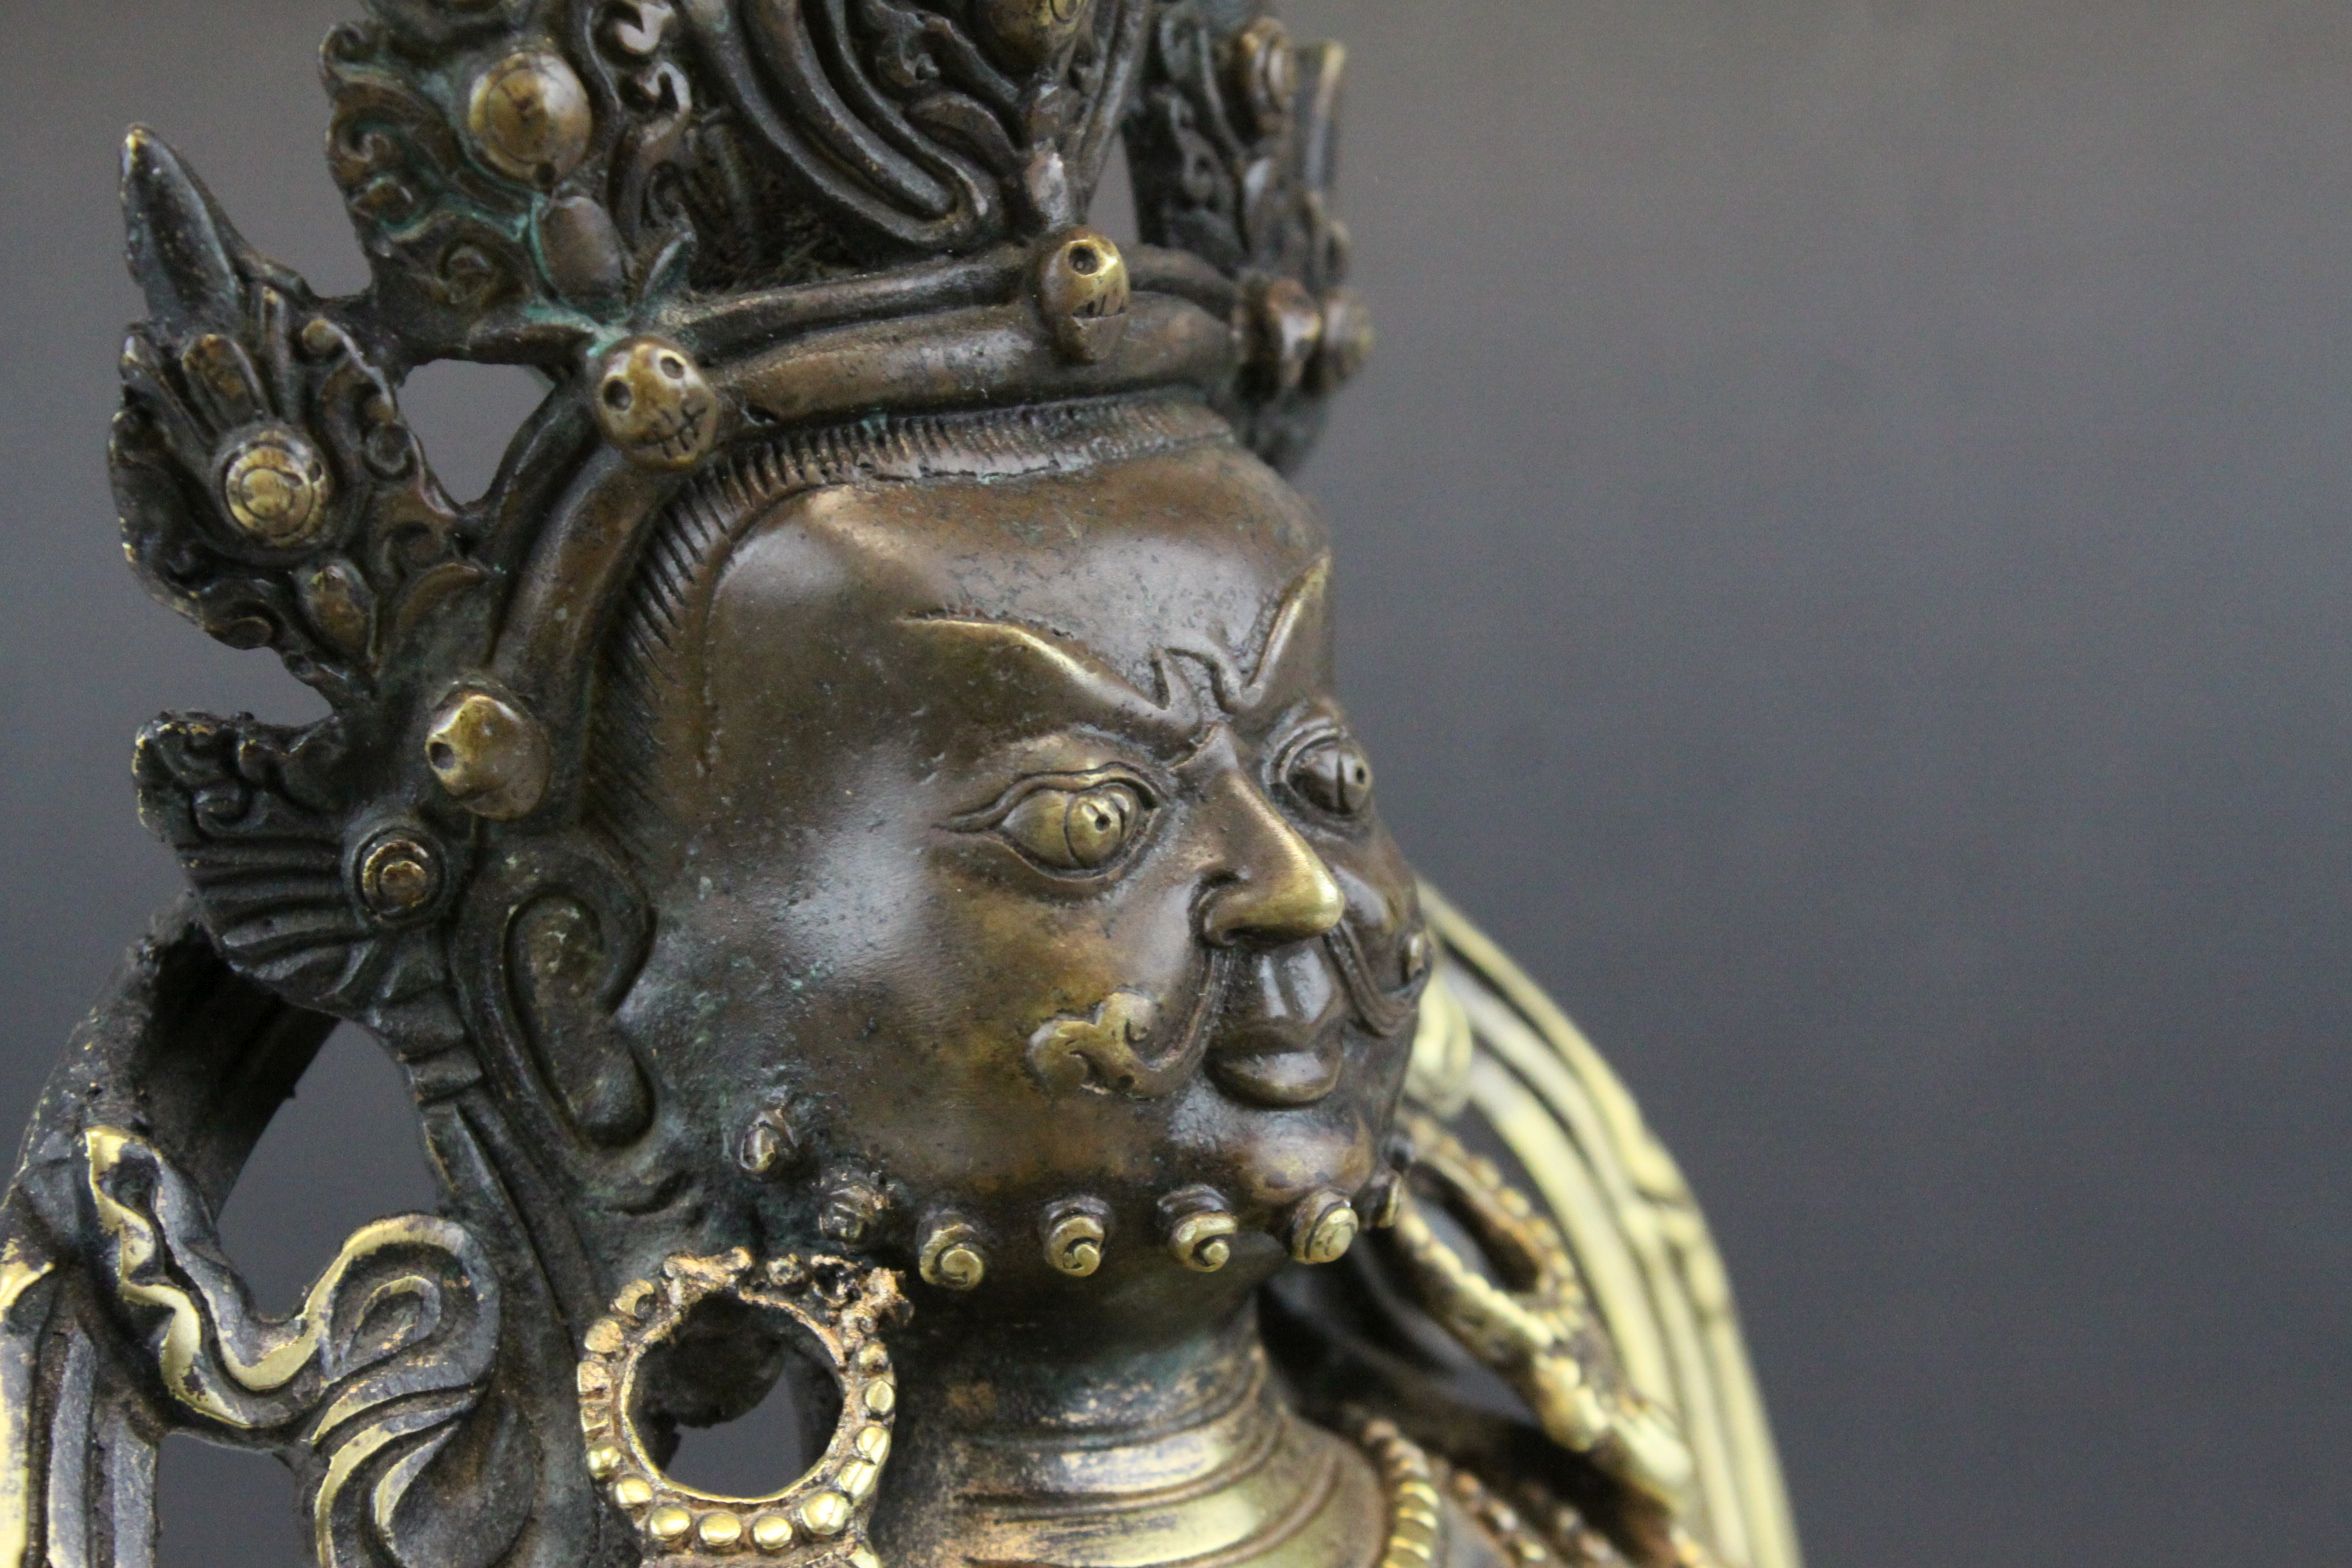 South East Asian Bronze Seated Deity / God, 30cms high - Image 7 of 7